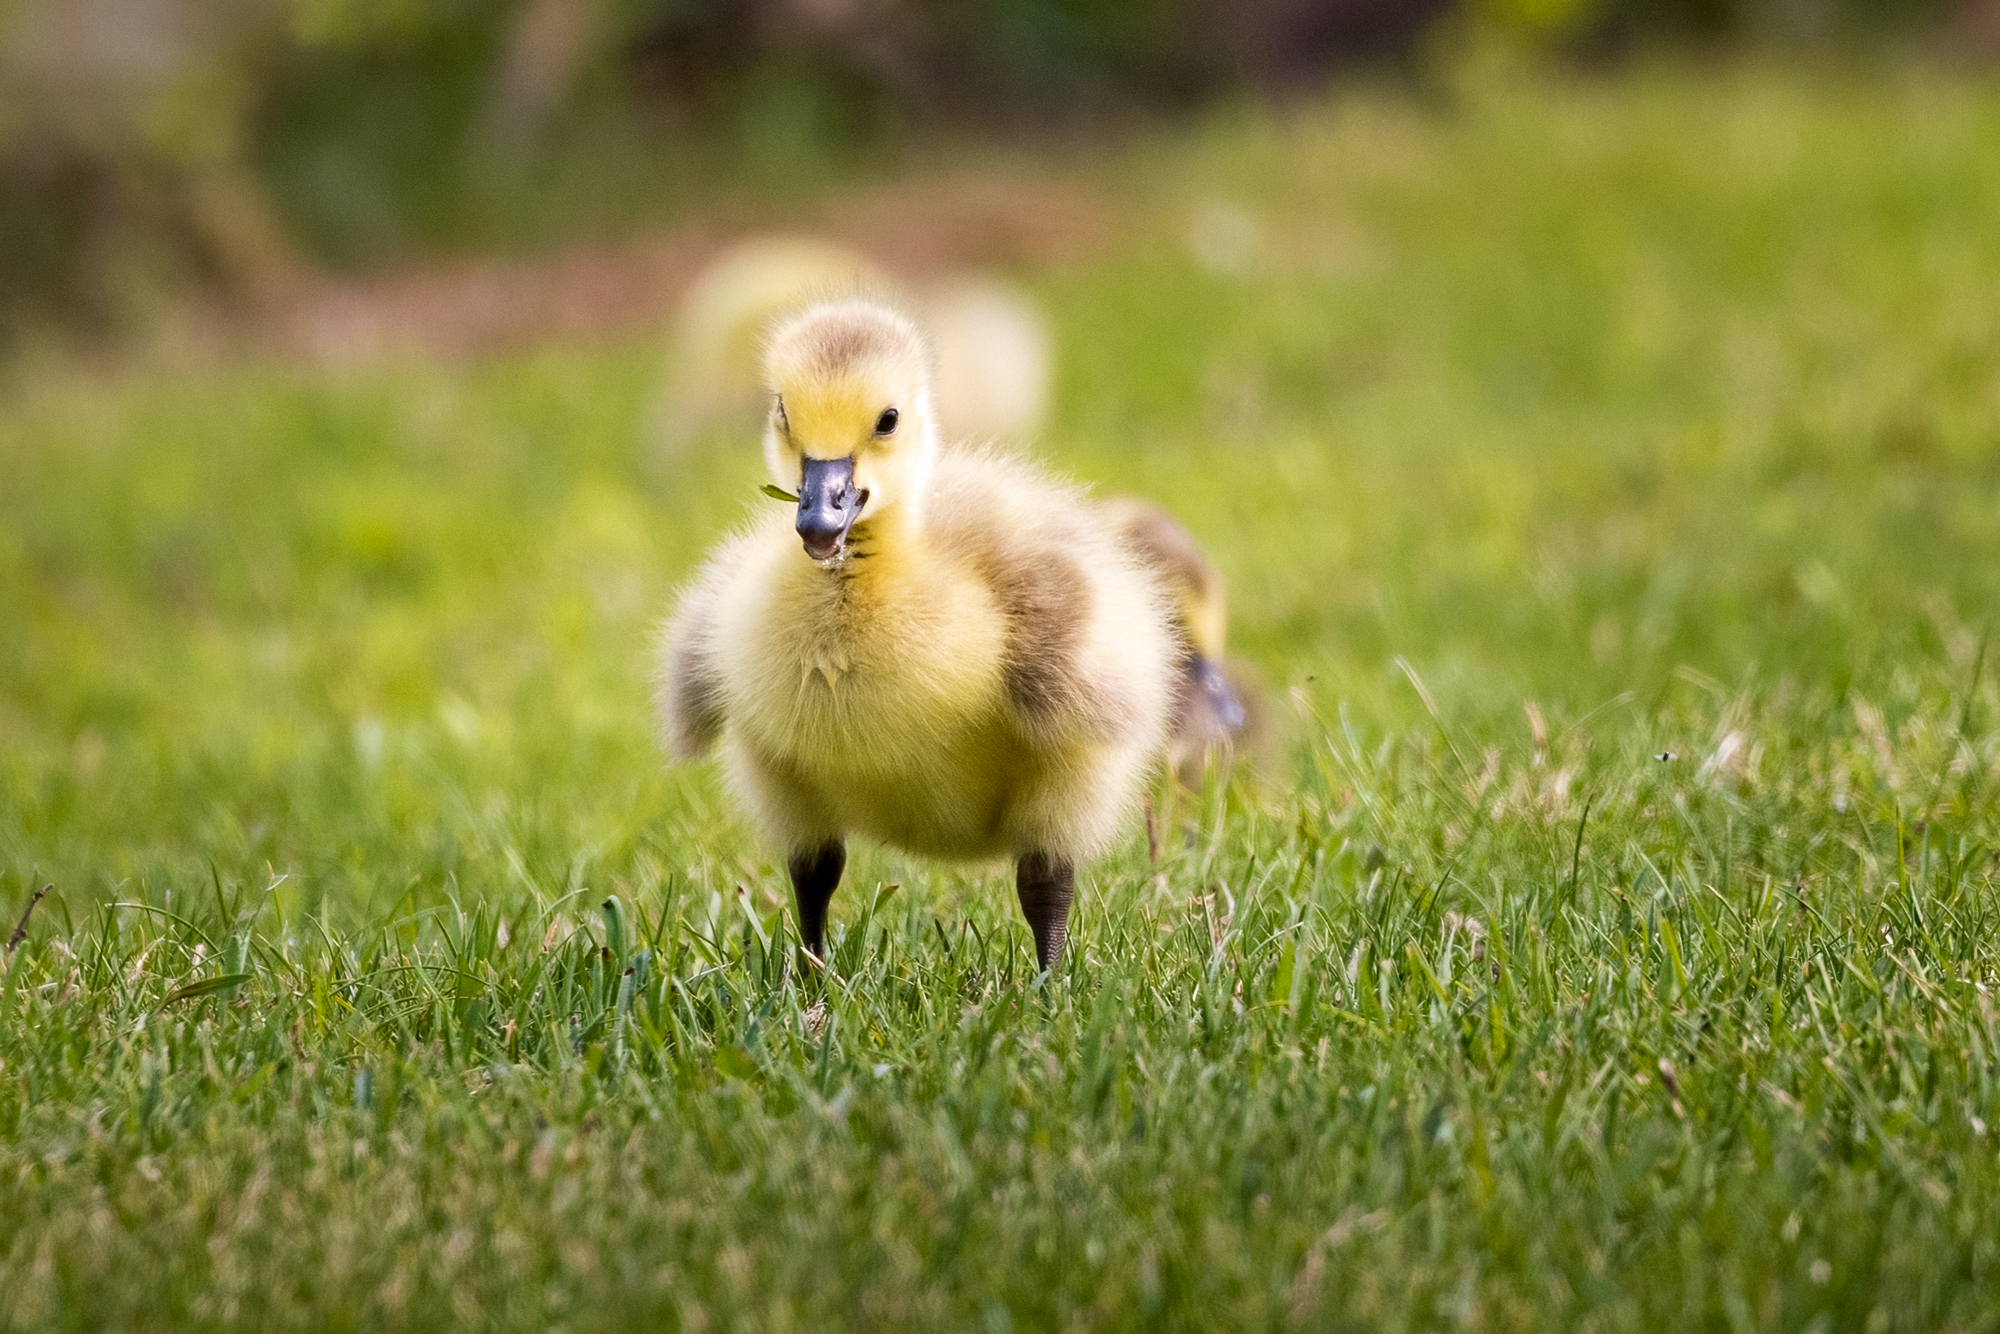 Canada Goose (gosling) walking in the grass